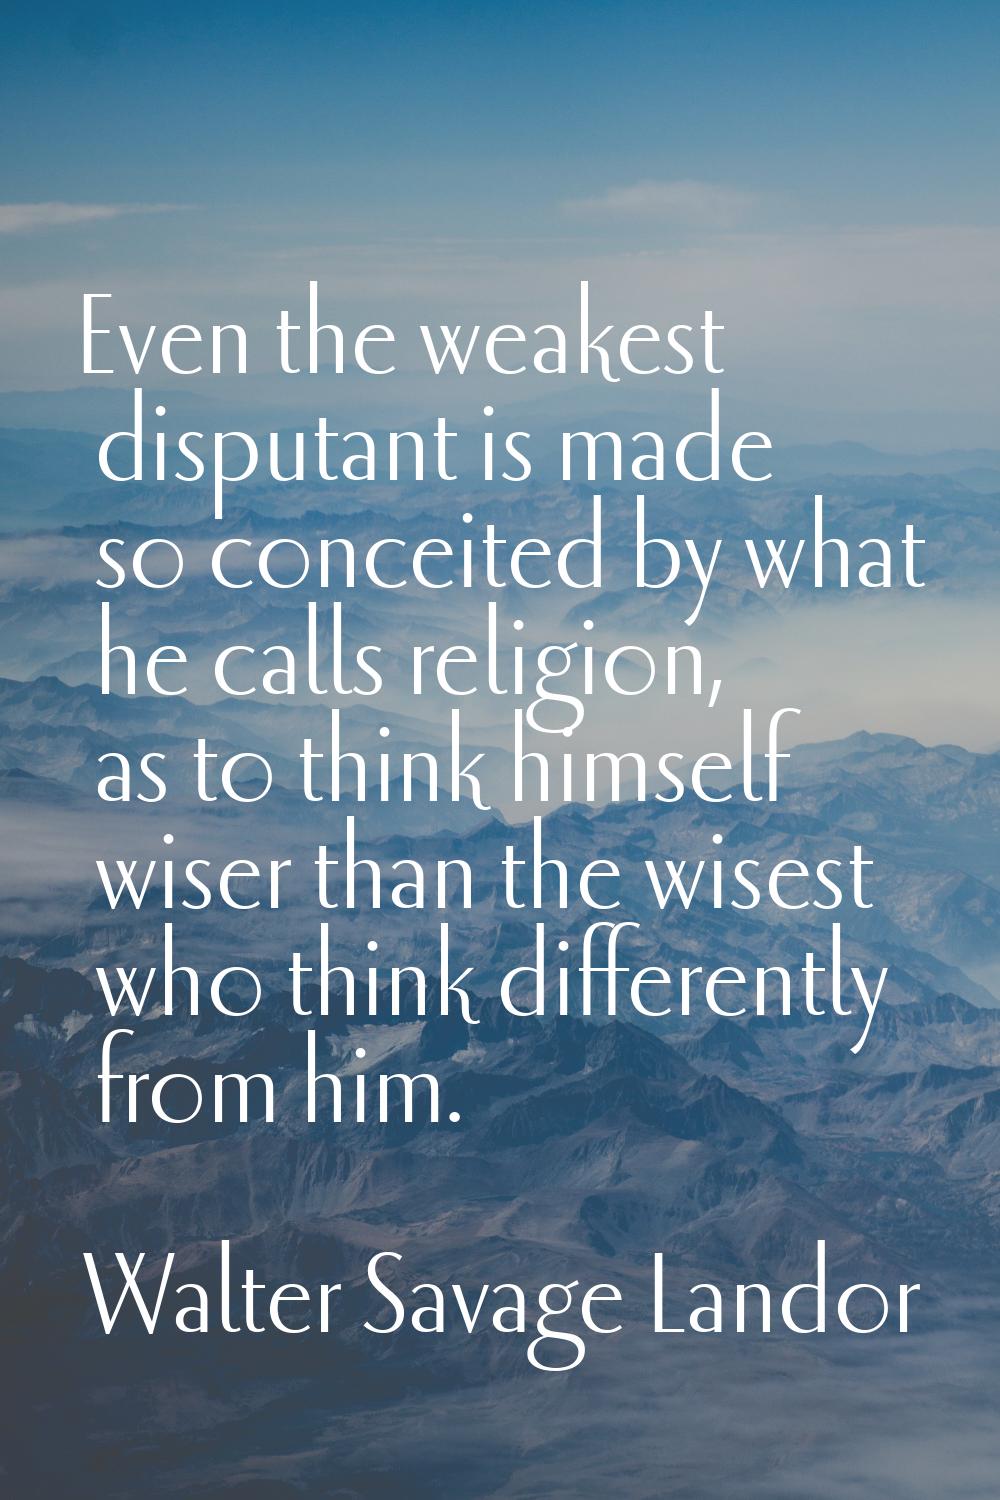 Even the weakest disputant is made so conceited by what he calls religion, as to think himself wise